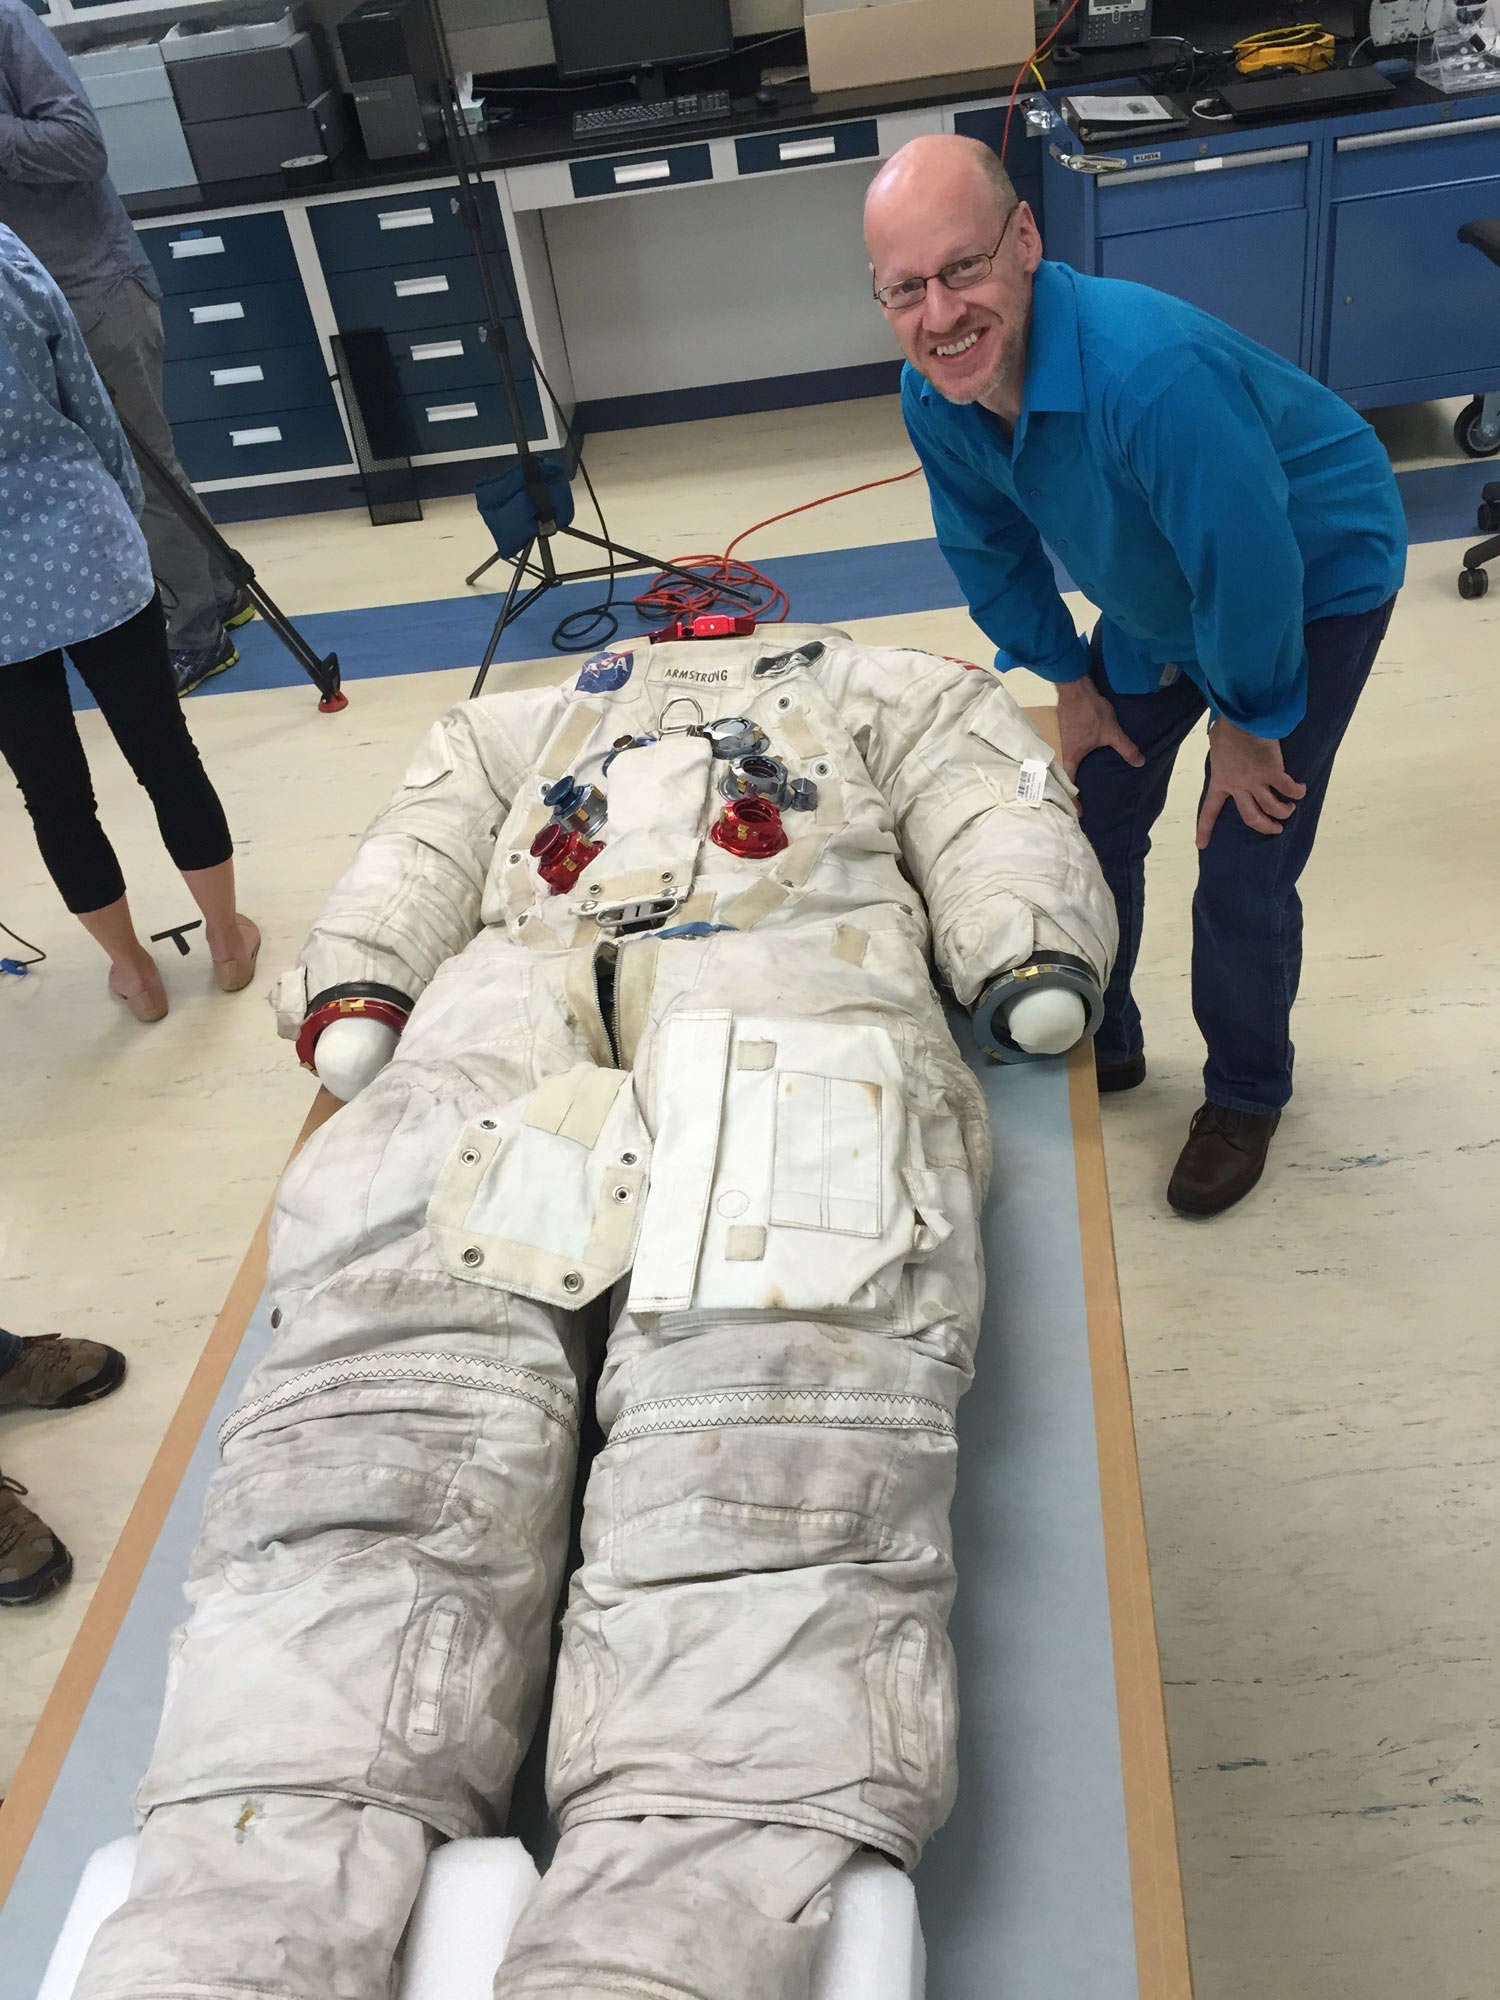 Phil Plait posing with Neil Armstrong's lunar EVA suit from Apollo 11 at the Smithsonian National Air and Space Museum's Udvar-Hazy Center. Credit: Phil Plait